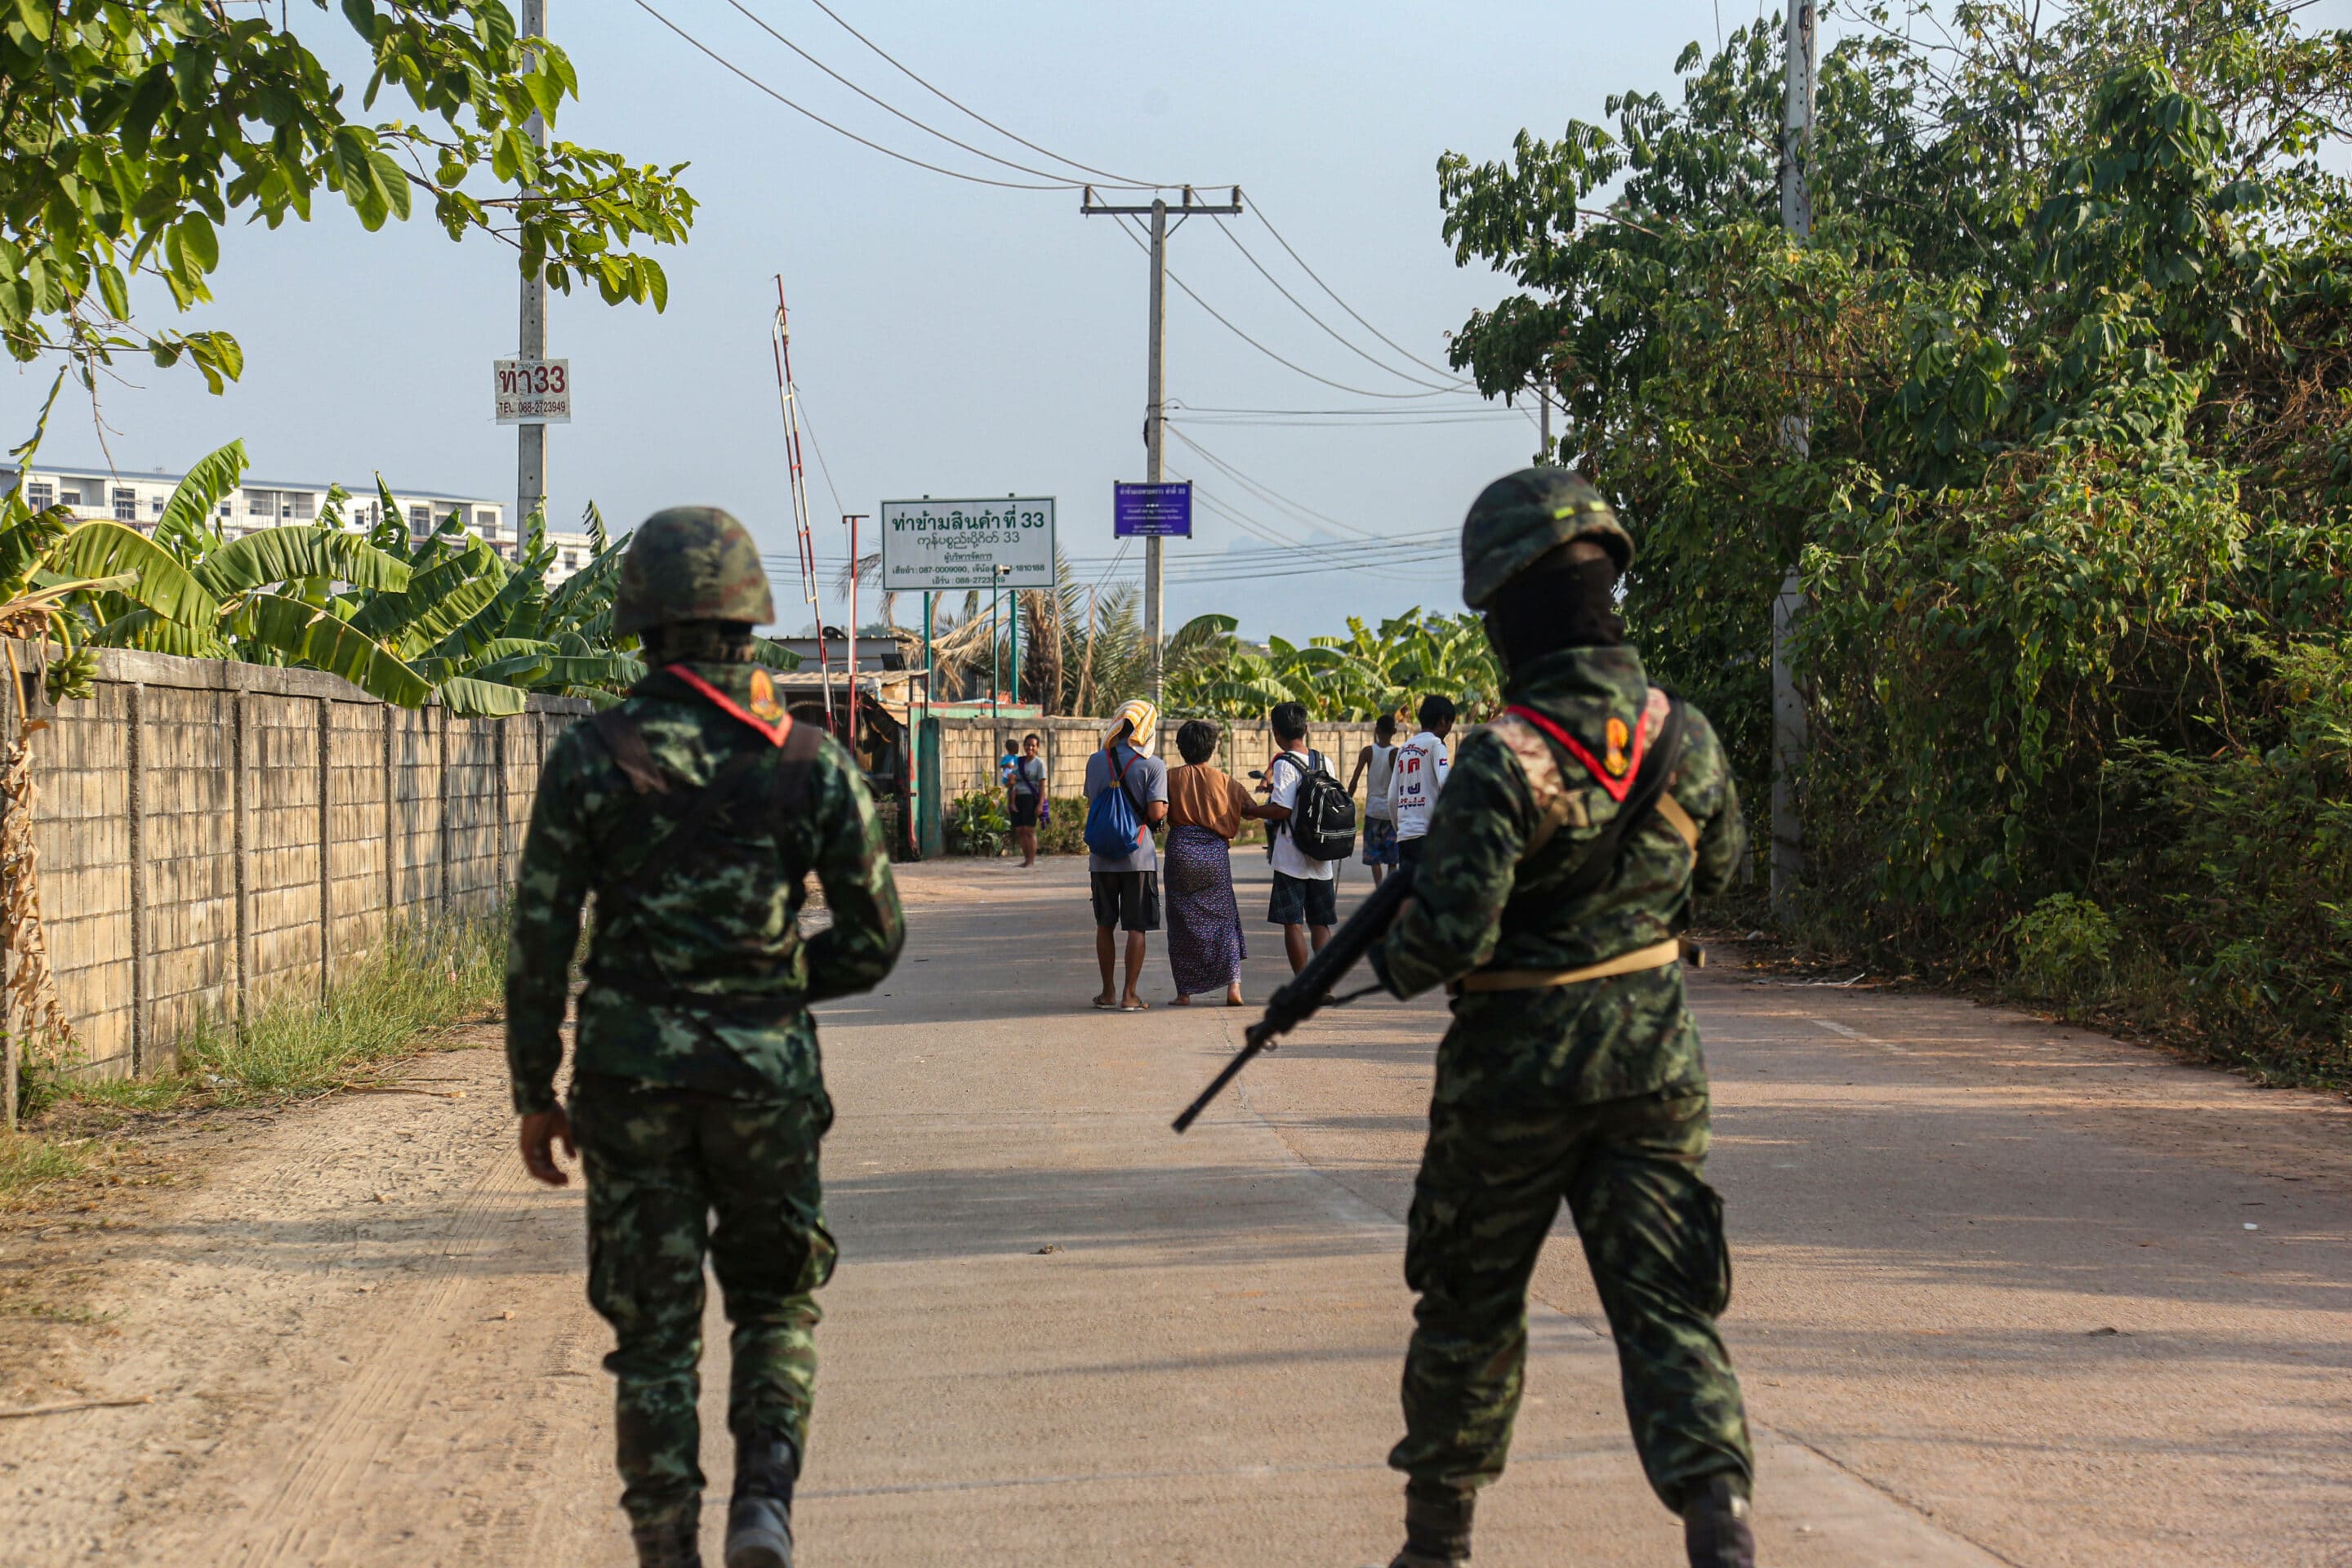 Thailand's soldiers take security on the back of the Myawaddy war Refugees. On April 12, Karen KNLA and PDF forces raided the army's 275th military garrison in Myawady town, and more than 100 soldiers attempted to flee to Thailand across Friendship Bridge No. 2. The KNLA/PDF joint forces attacked those soldiers on the night of April 19th.

According to residents, there were no fewer than 40 bombs dropped in the military council's air response. As a result of the fighting, about 2,000 people fled to Mae Sot, Thailand, across the Moei (Thaung Yin) River. - Kaung Zaw Hein / SOPA//SOPAIMAGES_SOPA2364/Credit:SOPA Images/SIPA/2404212042